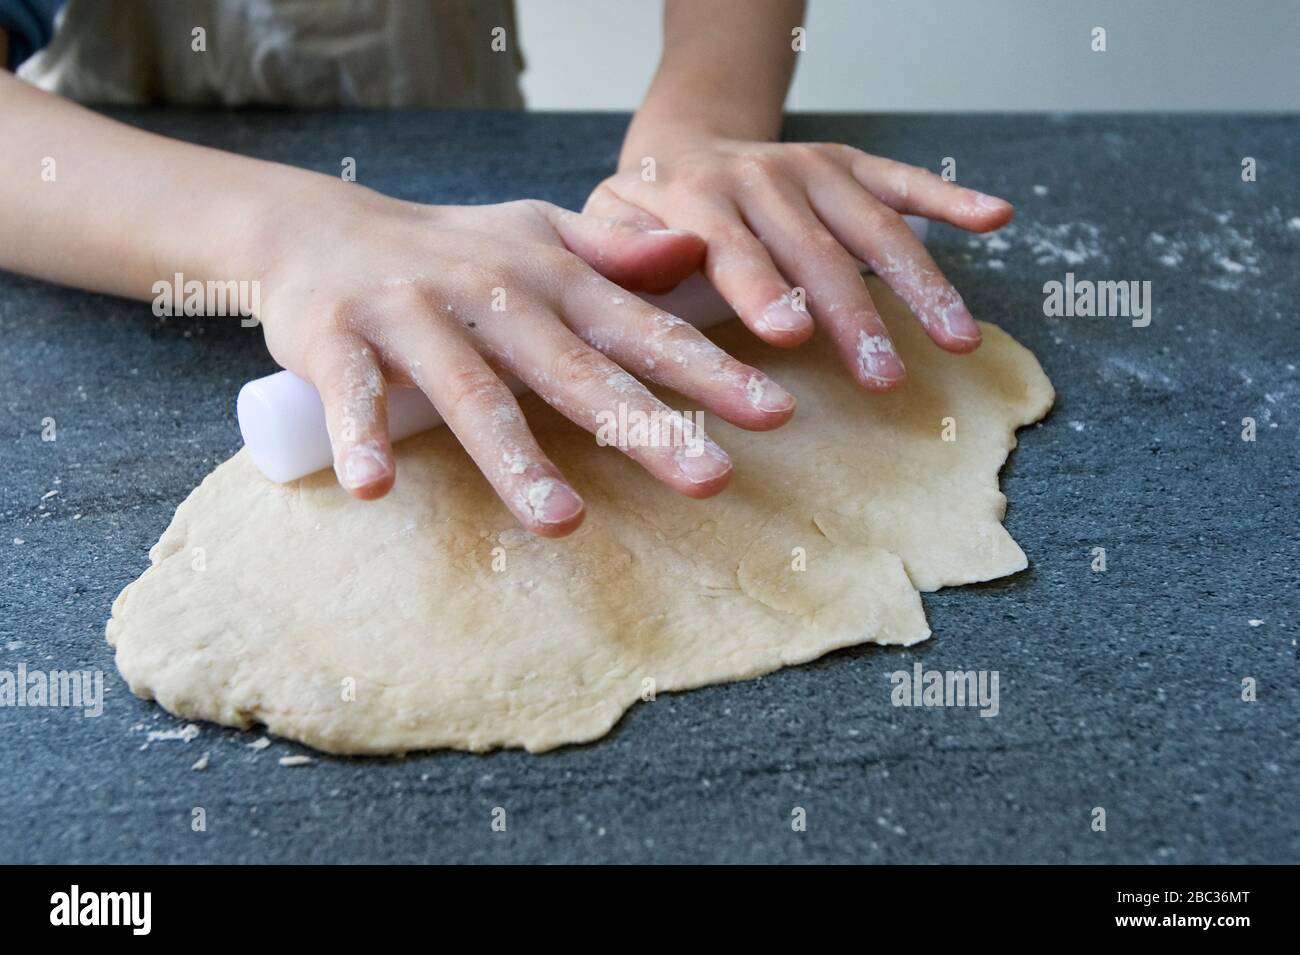 Child using plastic rolling pin to flatten out dough to make pizza or pastry. Stock Photo